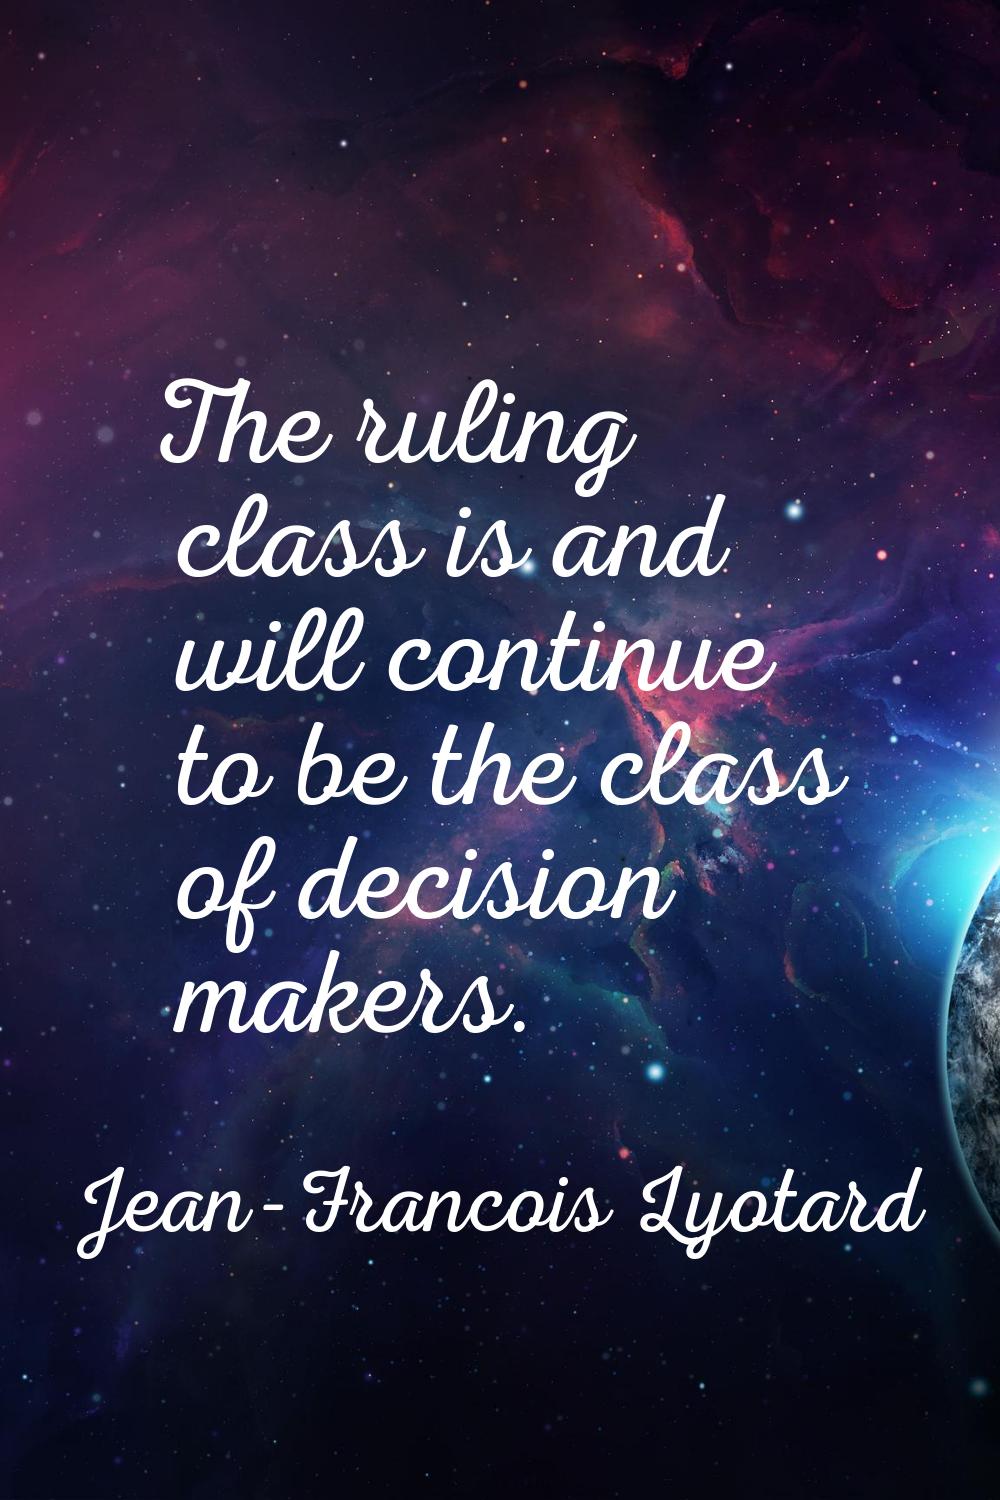 The ruling class is and will continue to be the class of decision makers.